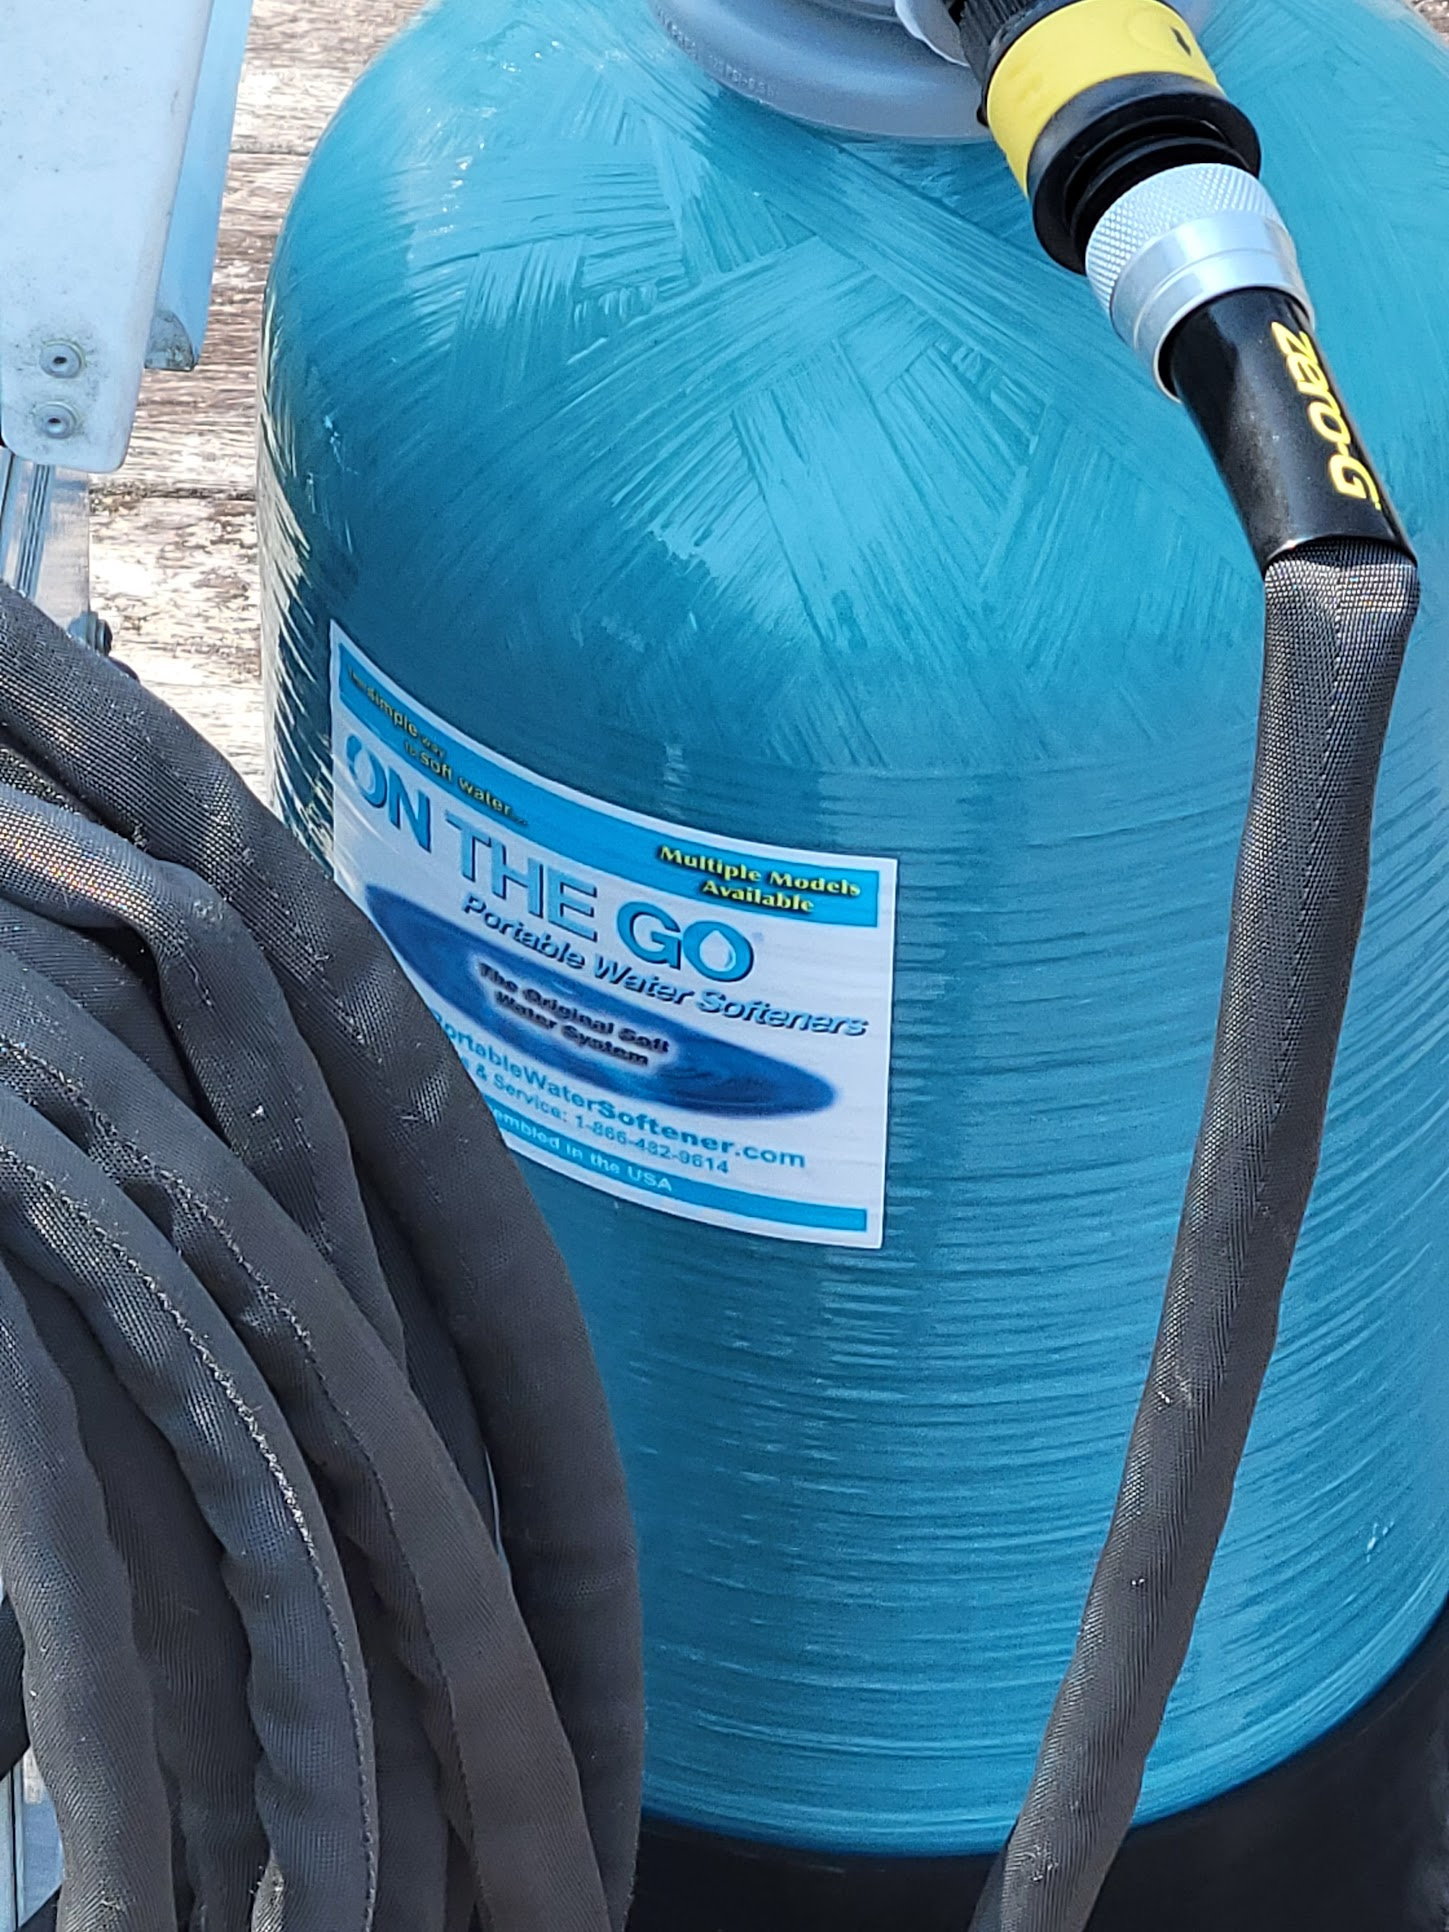 Portable Water Softener - A MUST HAVE FOR ALL - Page 4 - iRV2 Forums